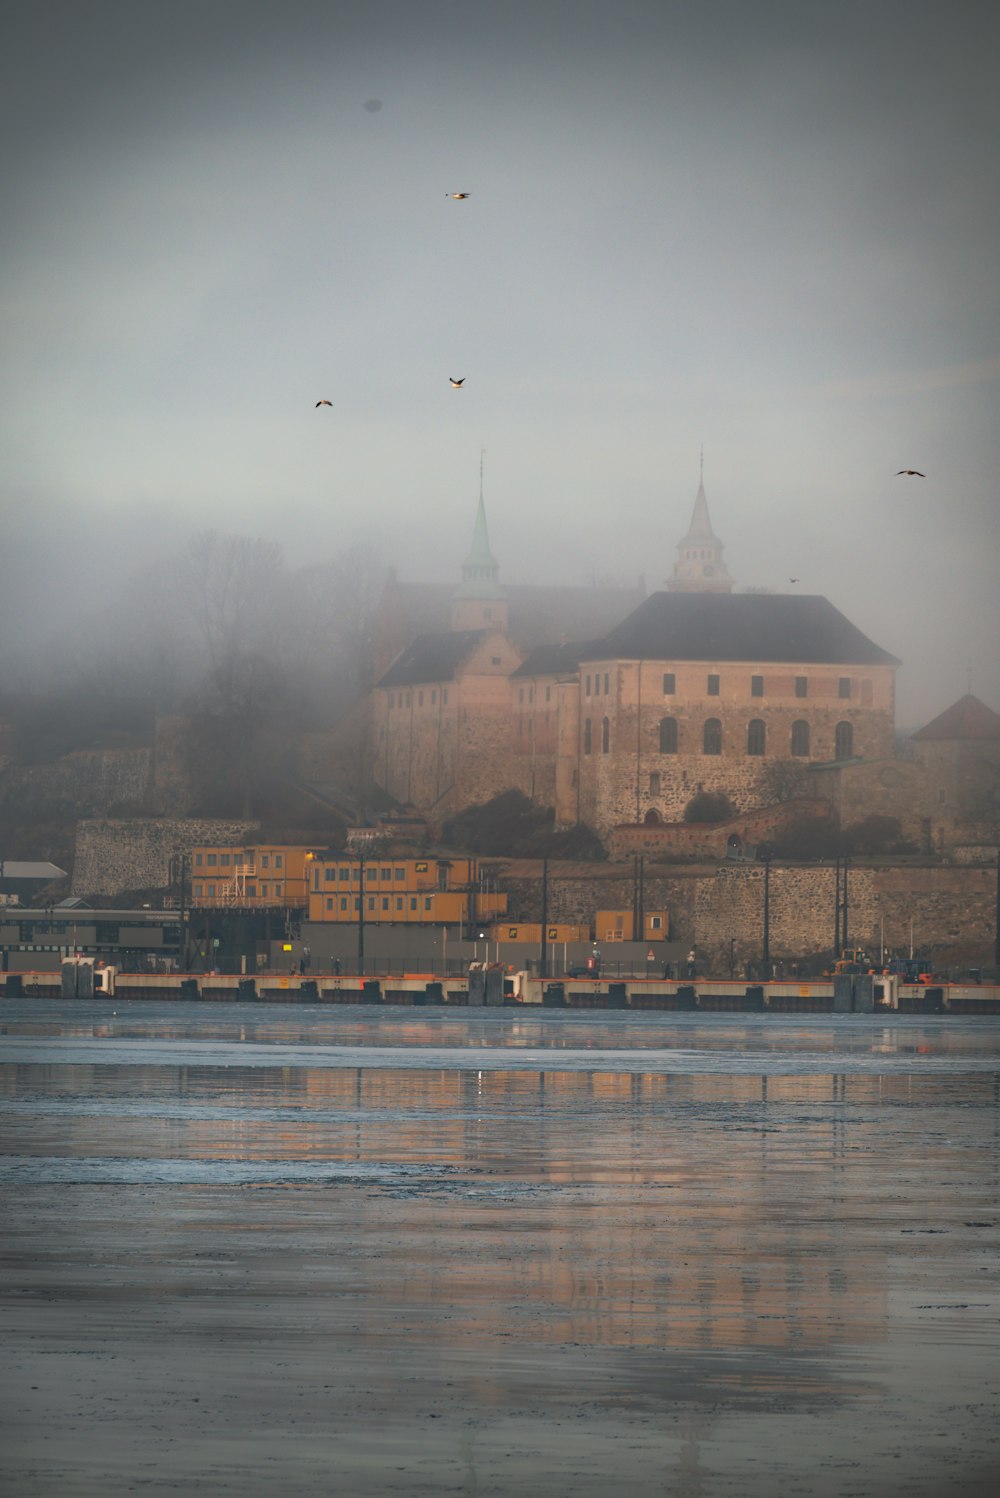 a foggy view of a castle and a body of water